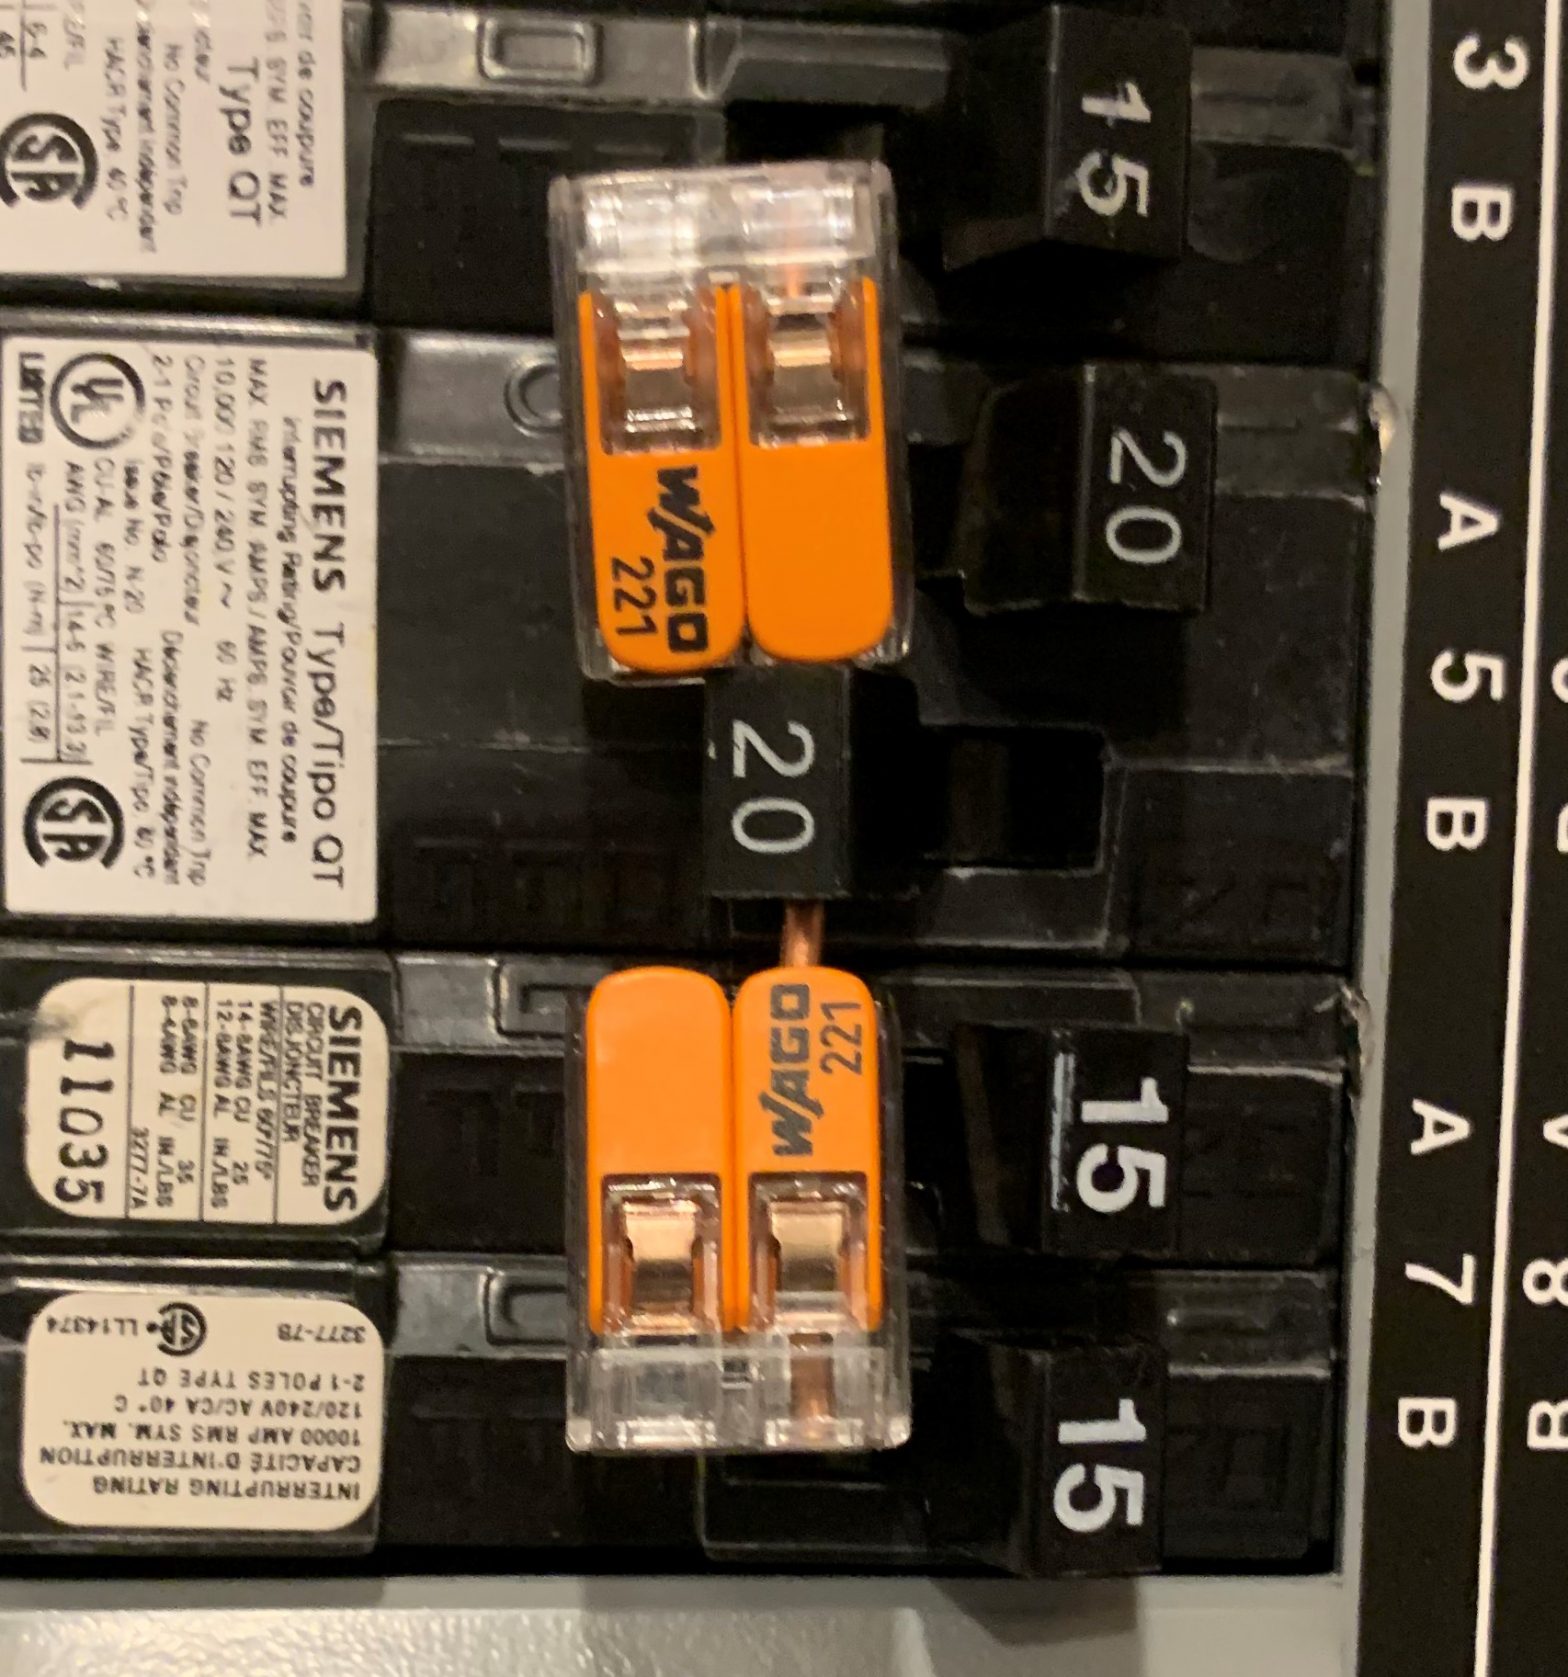 NO LIVE WIRE SURPRISES! Lock Circuit Breakers When Off Using Wagos and a Wire